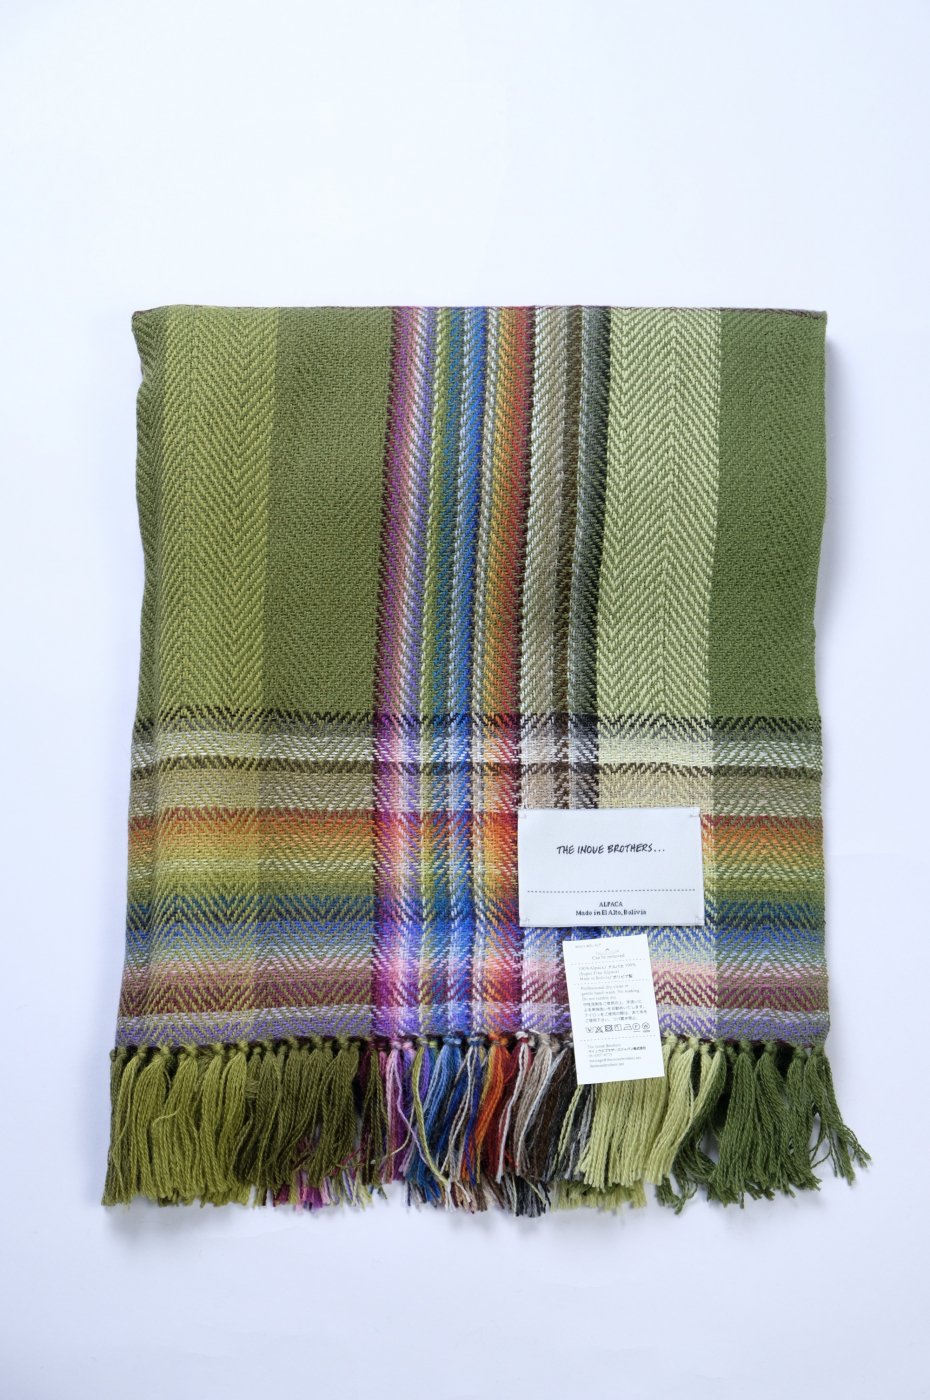 THE INOUE BROTHERS... "Multi Colored Scarf / GREEN"